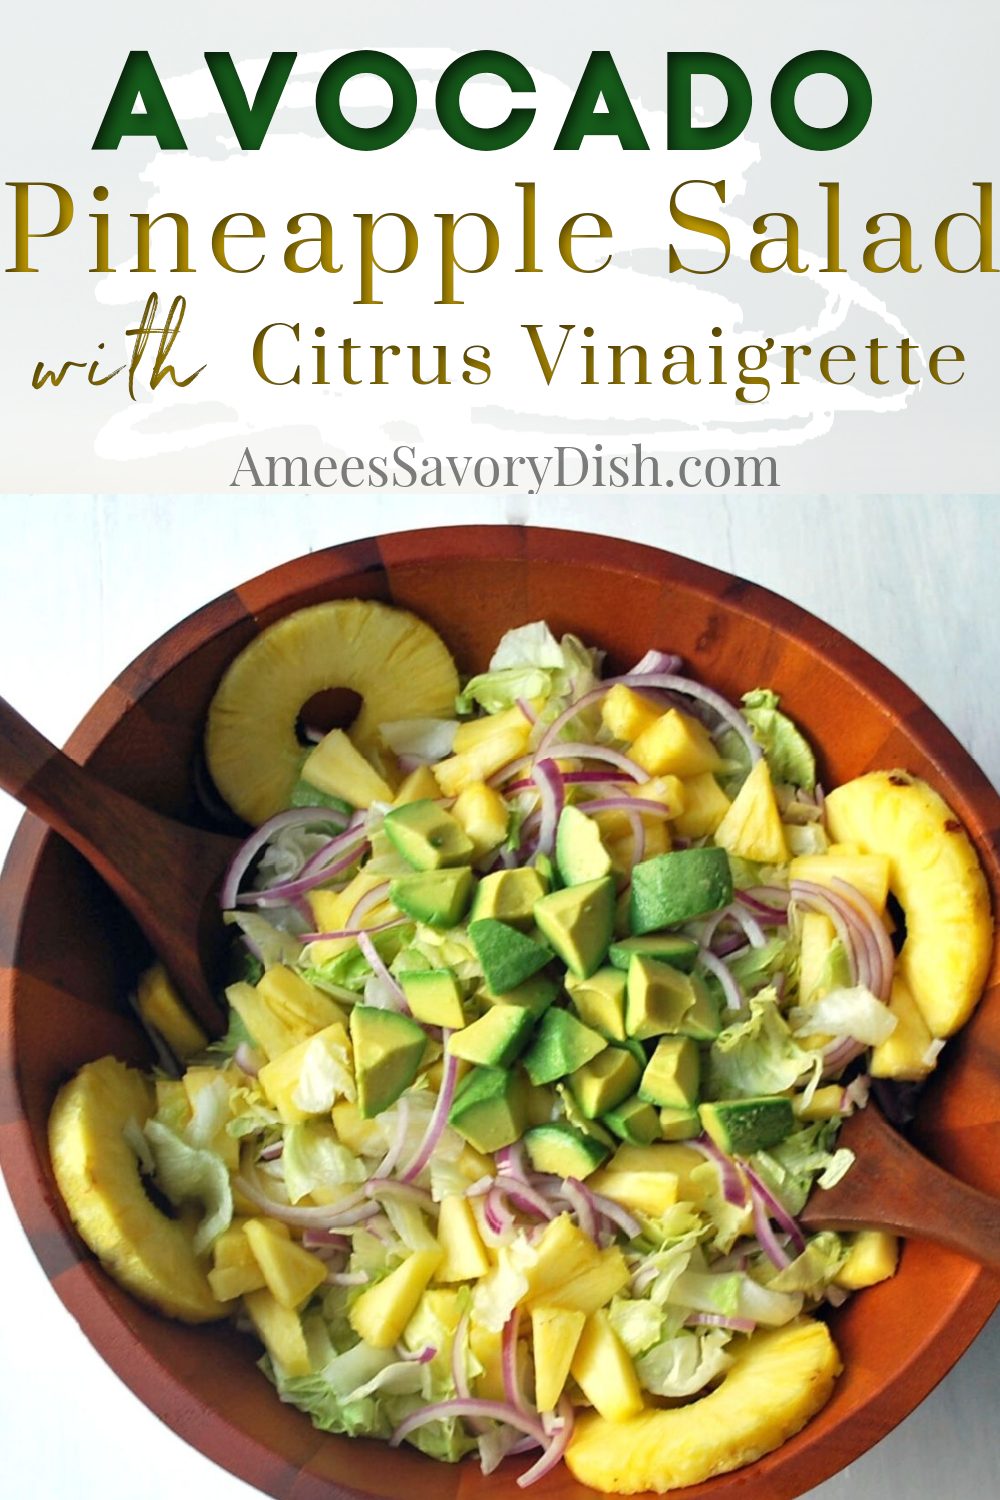 Avocado Pineapple Salad is a Cuban-inspired salad recipe made with iceberg lettuce, fresh pineapple, avocado, and red onion topped with a citrus vinaigrette. #cubansalad #avocadosalad #pineapplesalad #saladrecipes #glutenfree via @Ameessavorydish